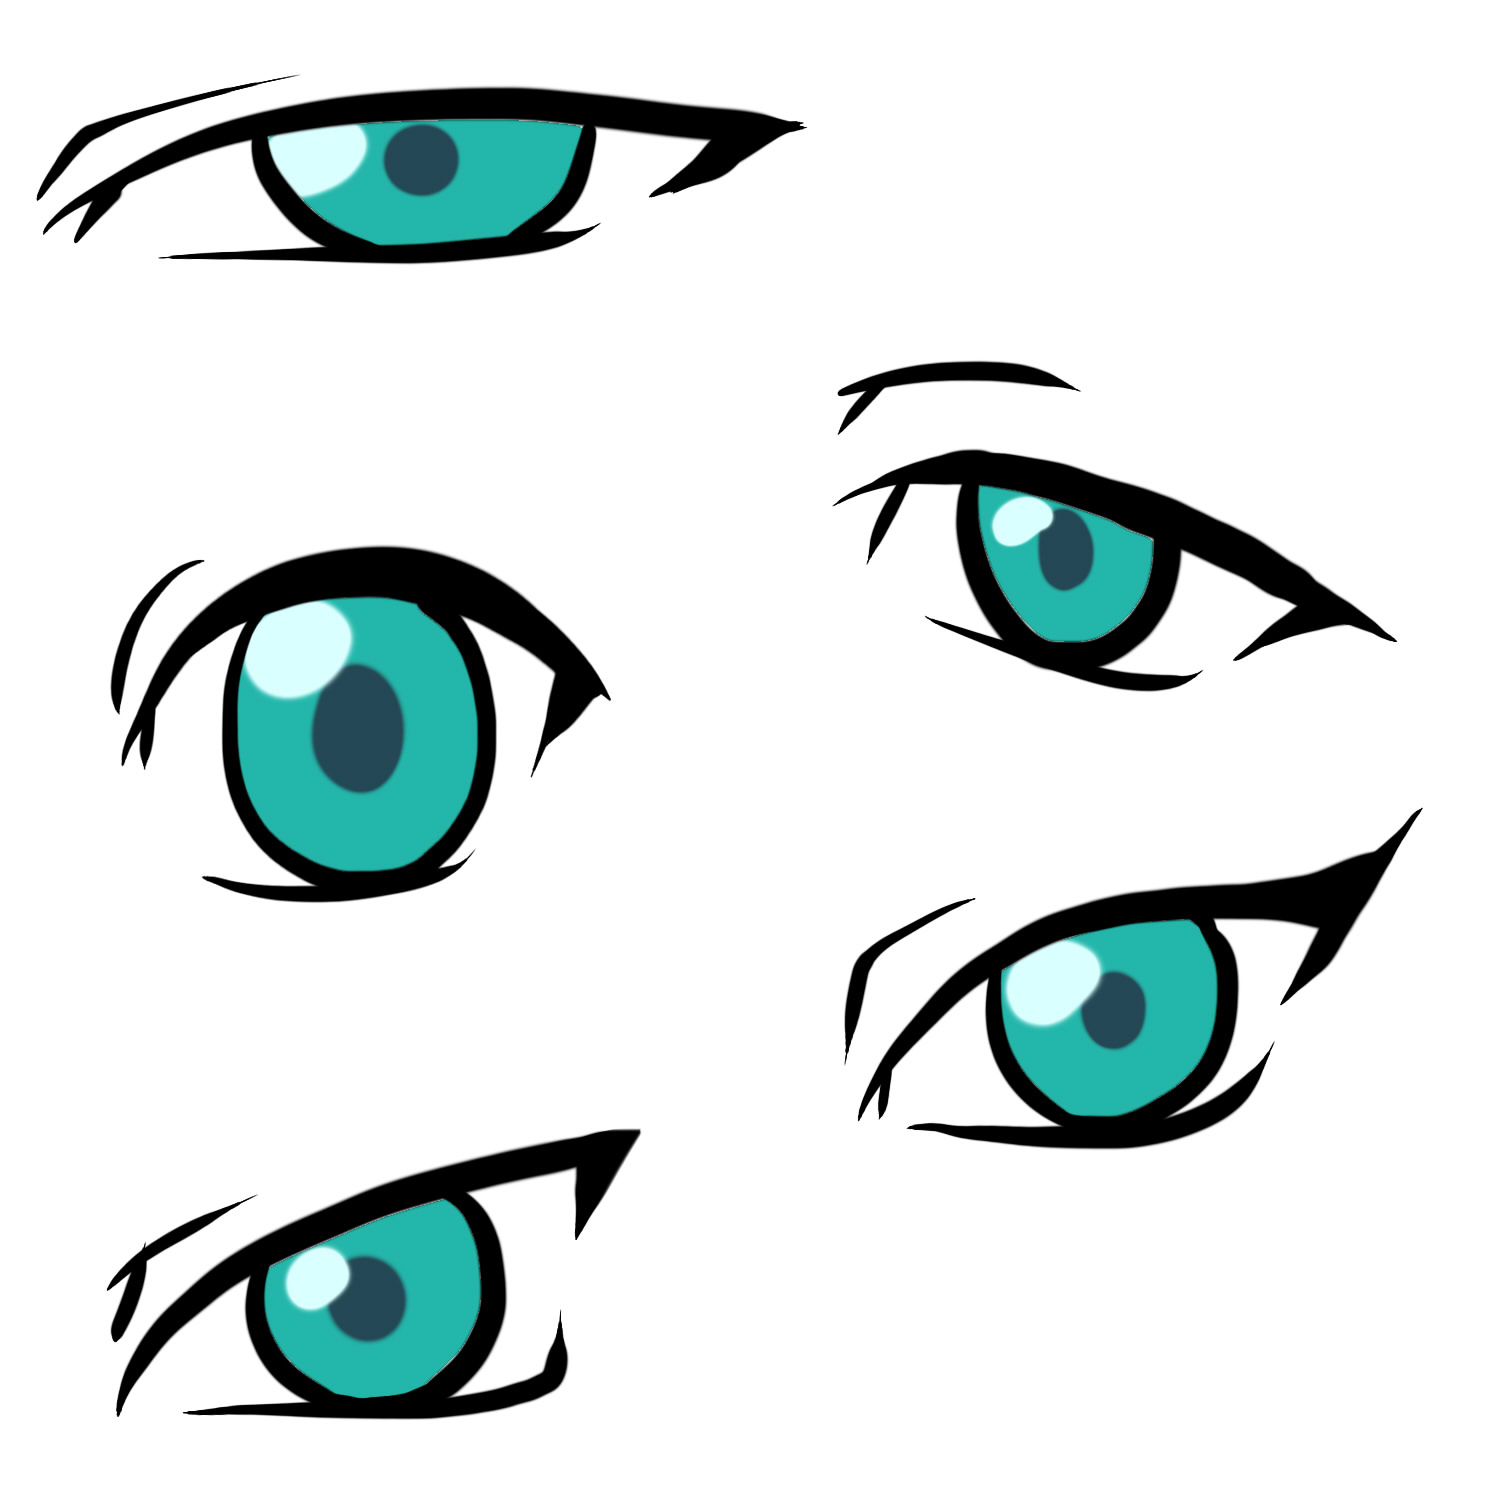 How to Draw ANIME Eyes | Easy Step by Step - YouTube